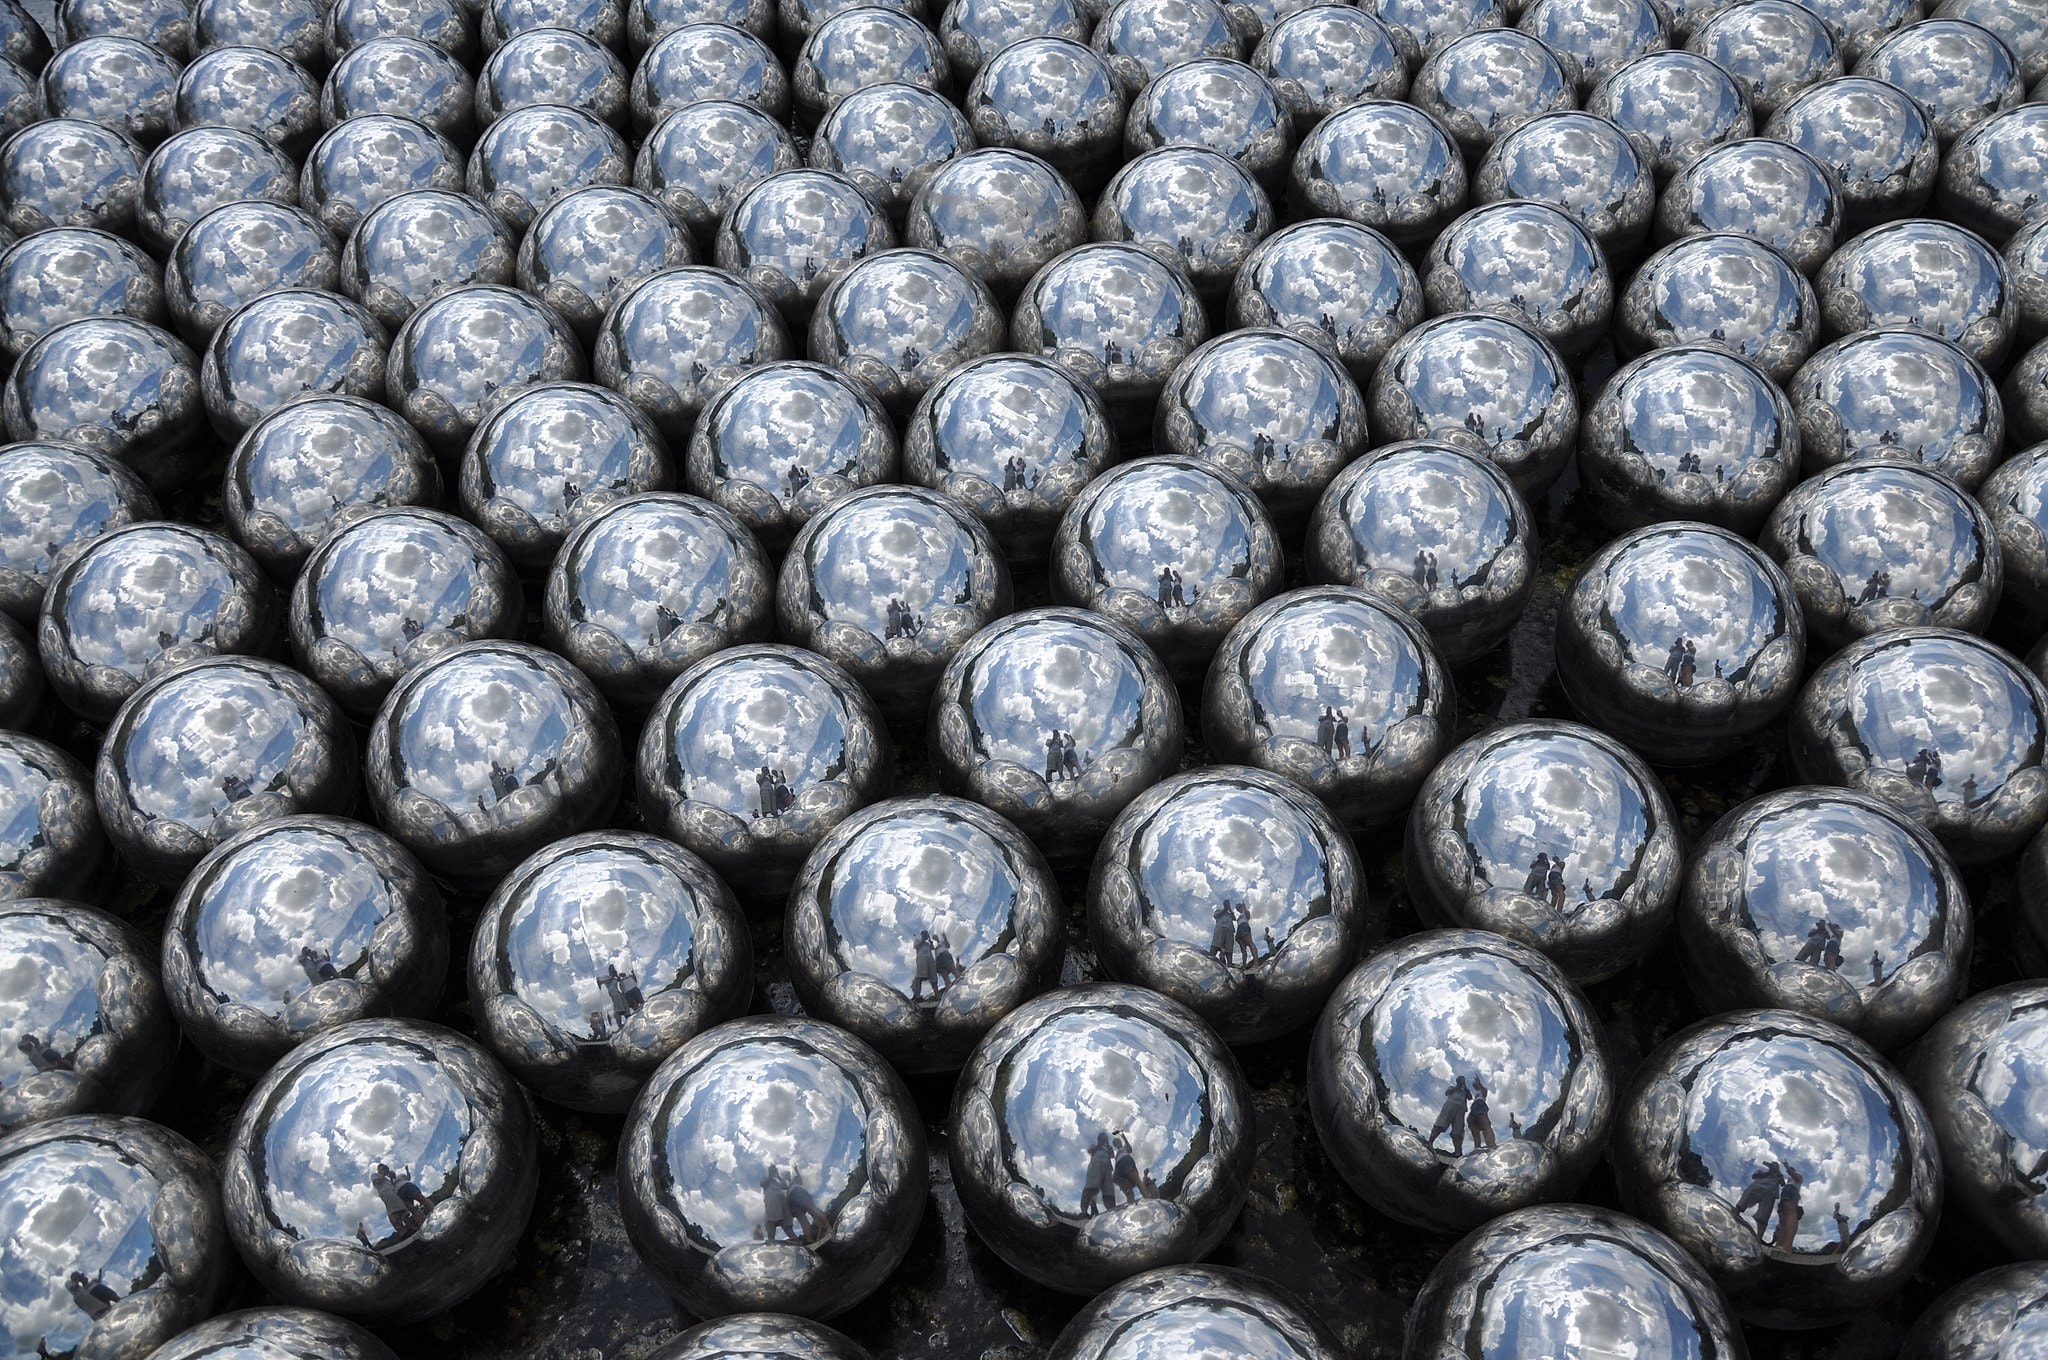 A close up of silver metal marbles with a reflection of a couple in each of them